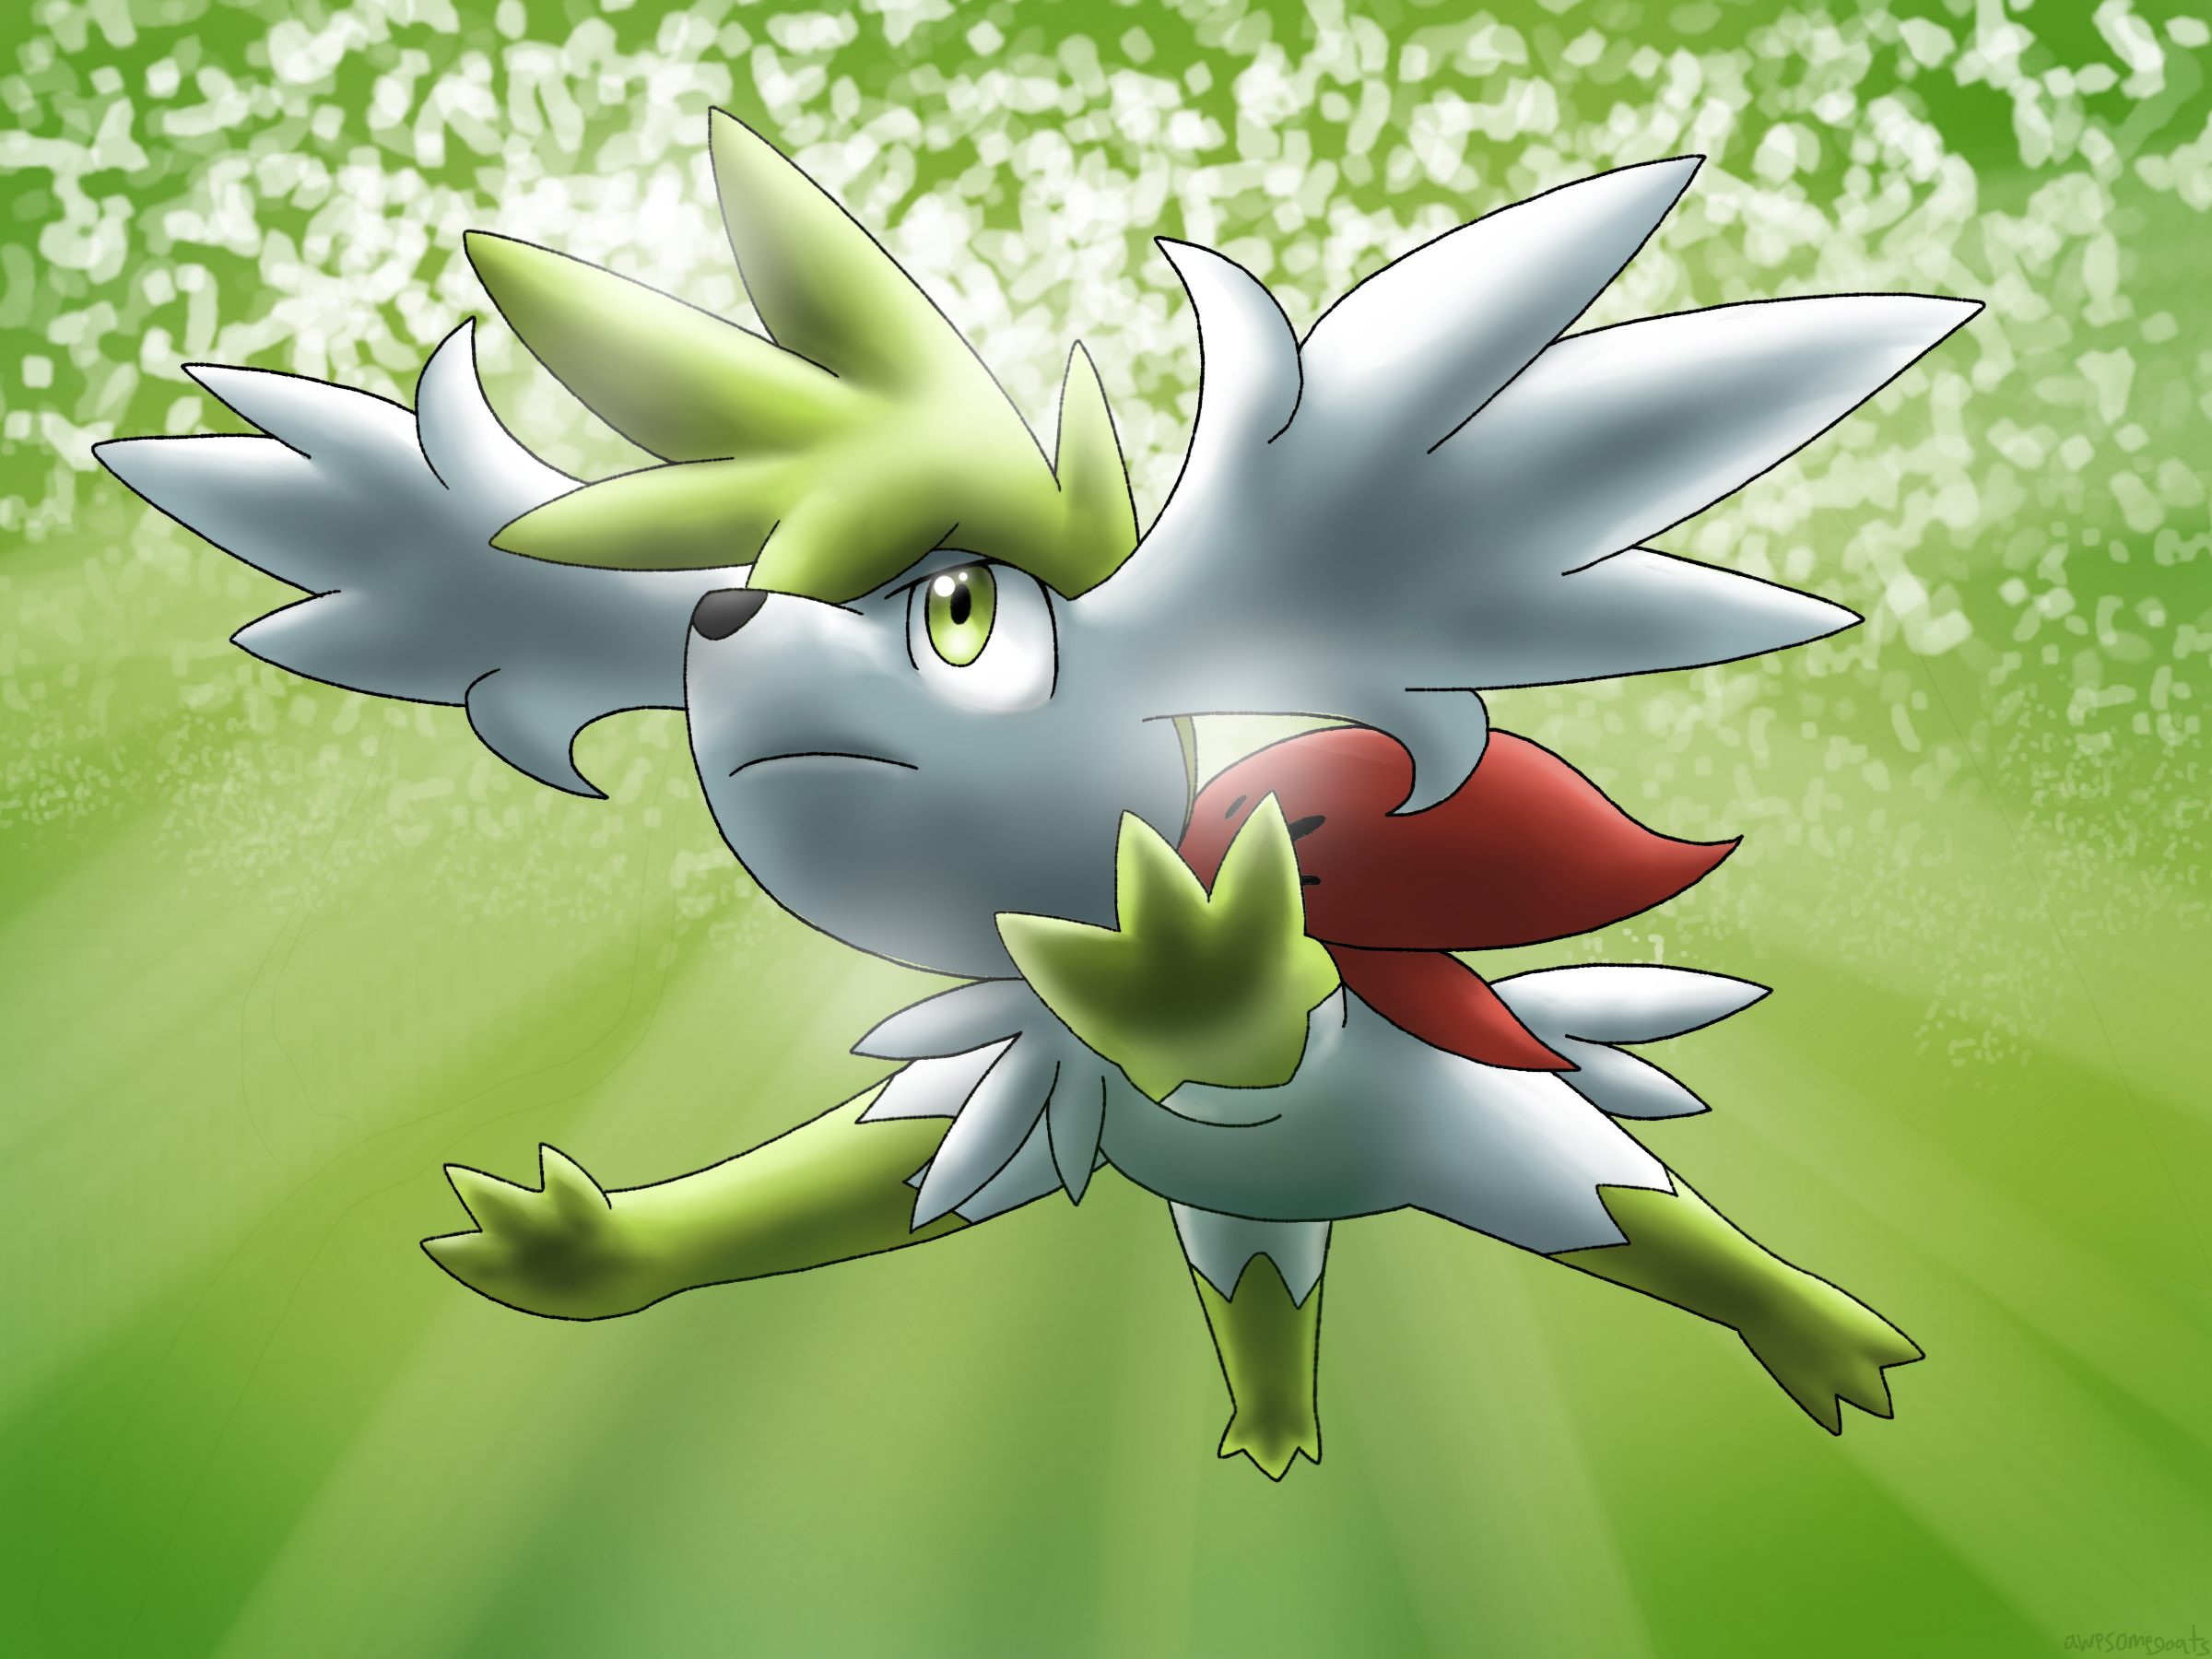 Shaymin Sky Forme Art, Others Added